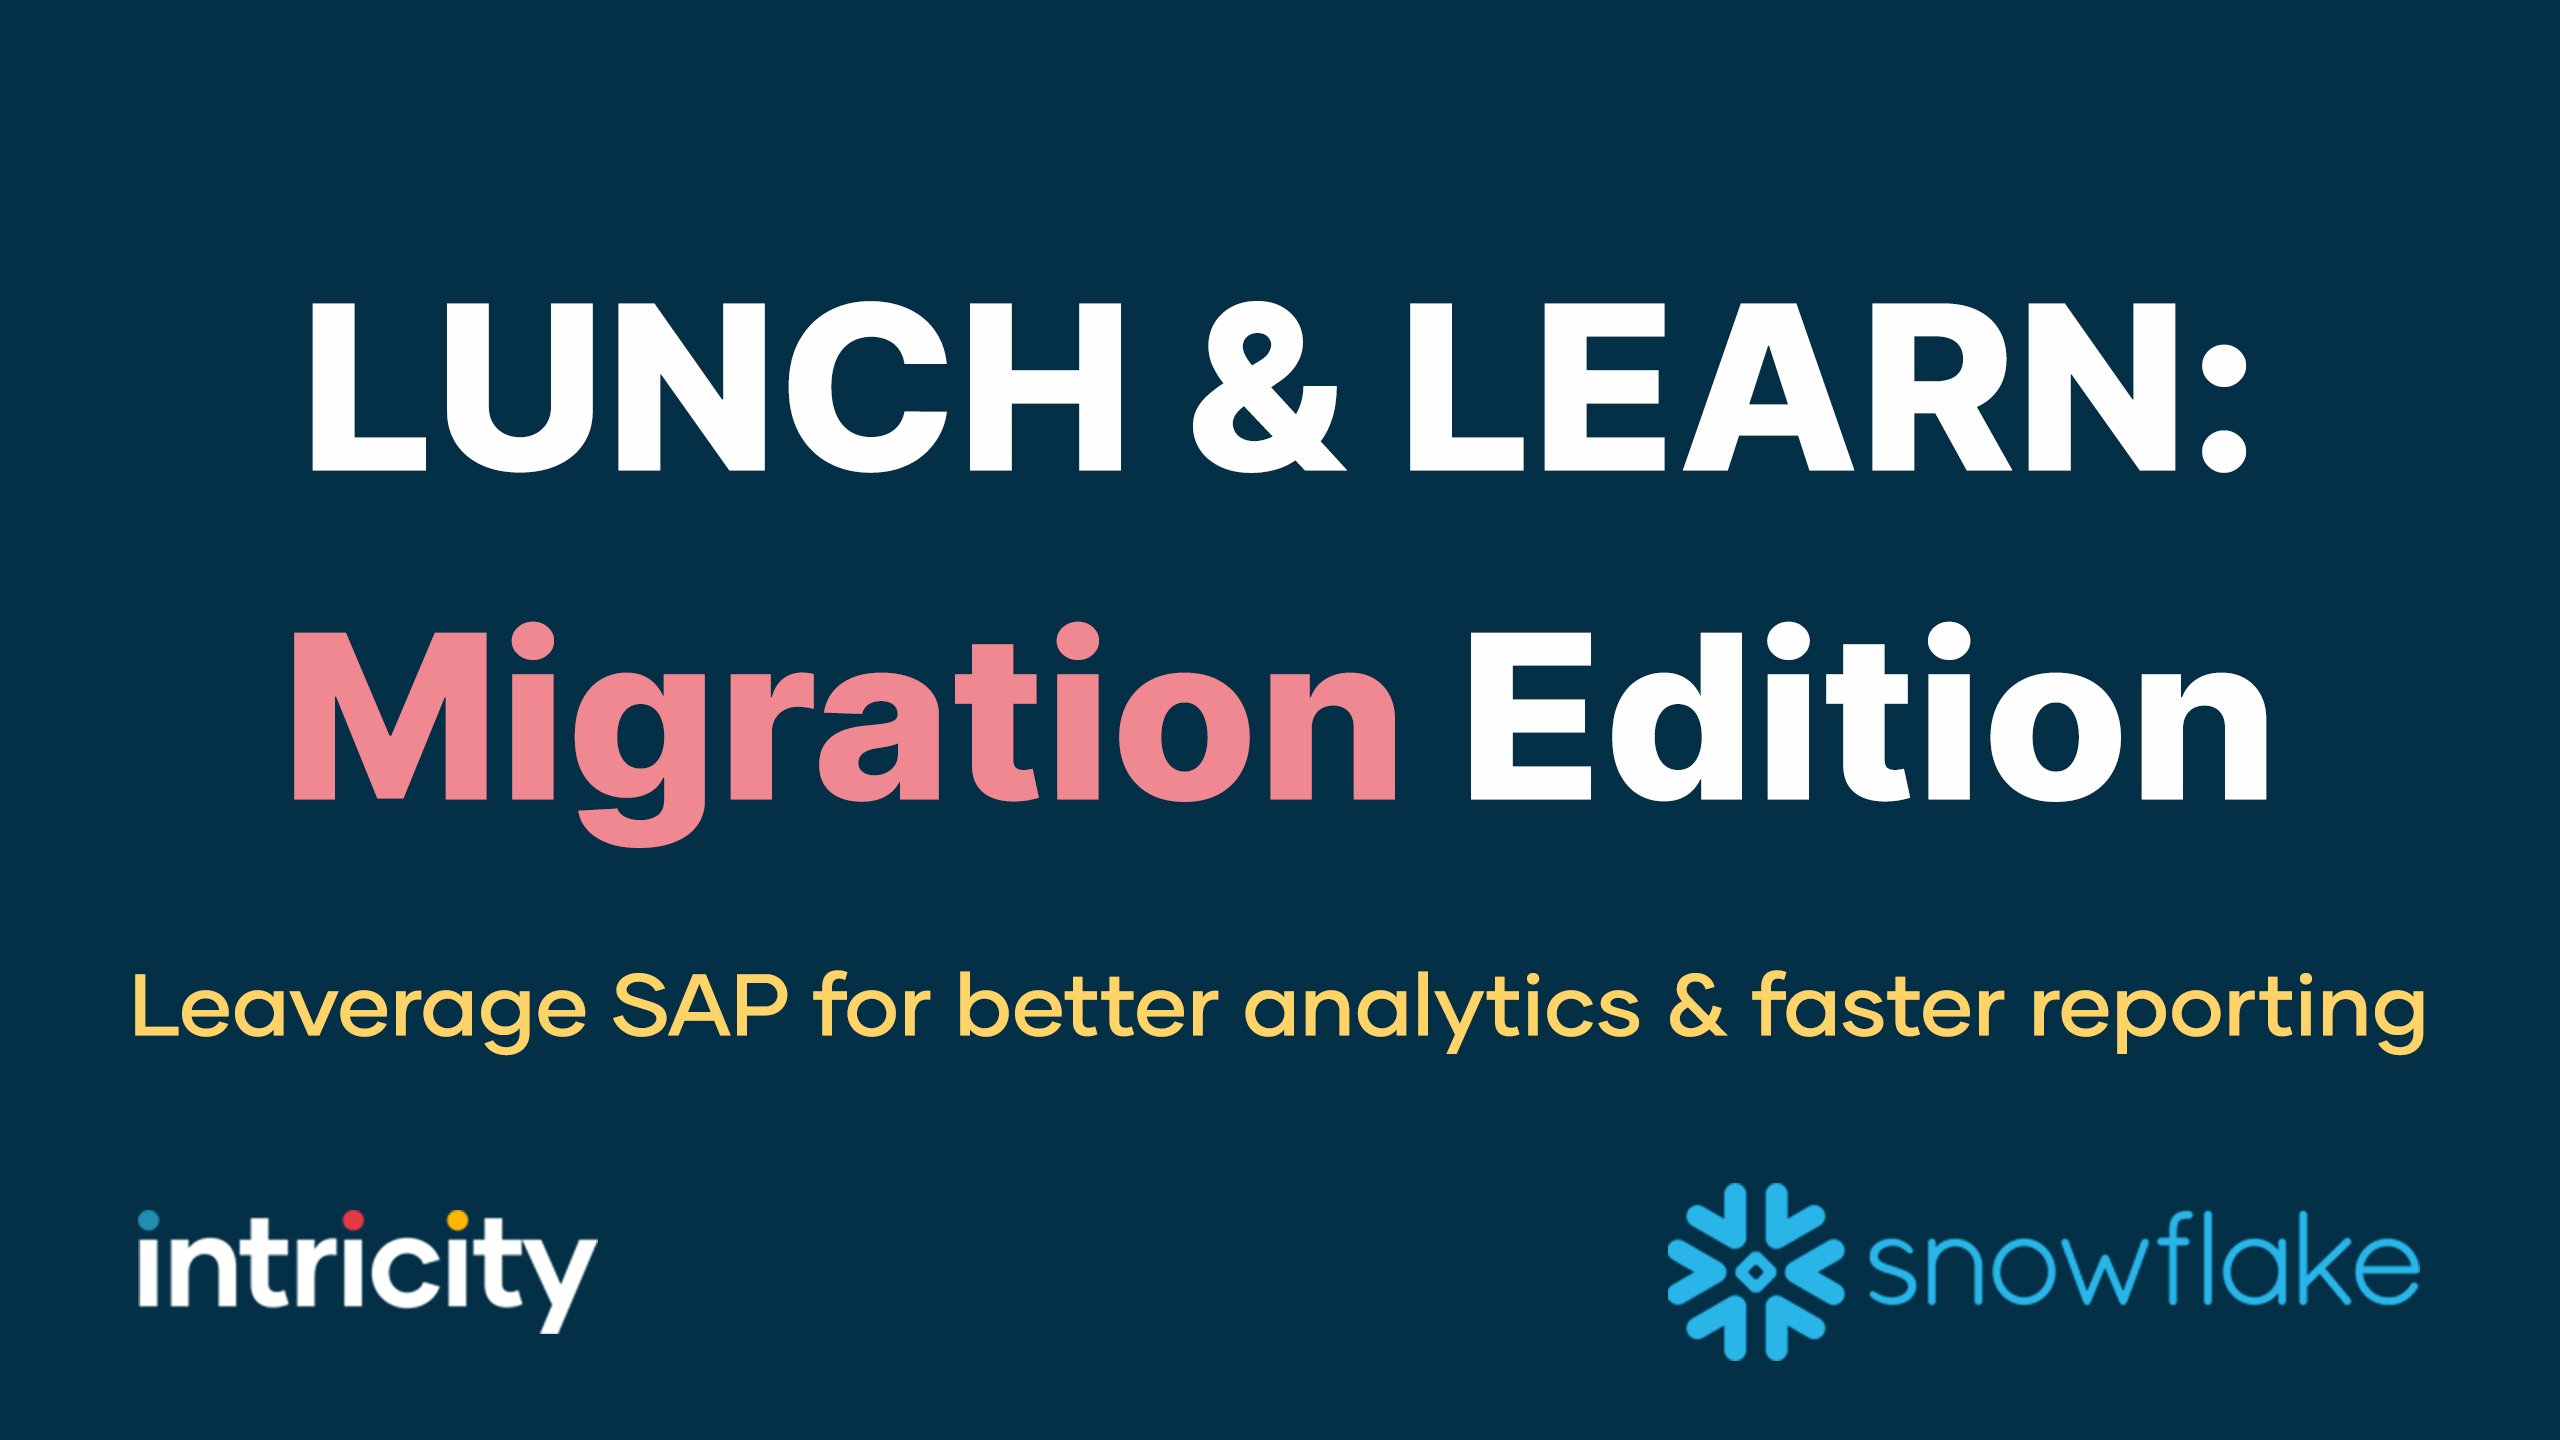 Lunch & Learn: Migration Edition with Snowflake!